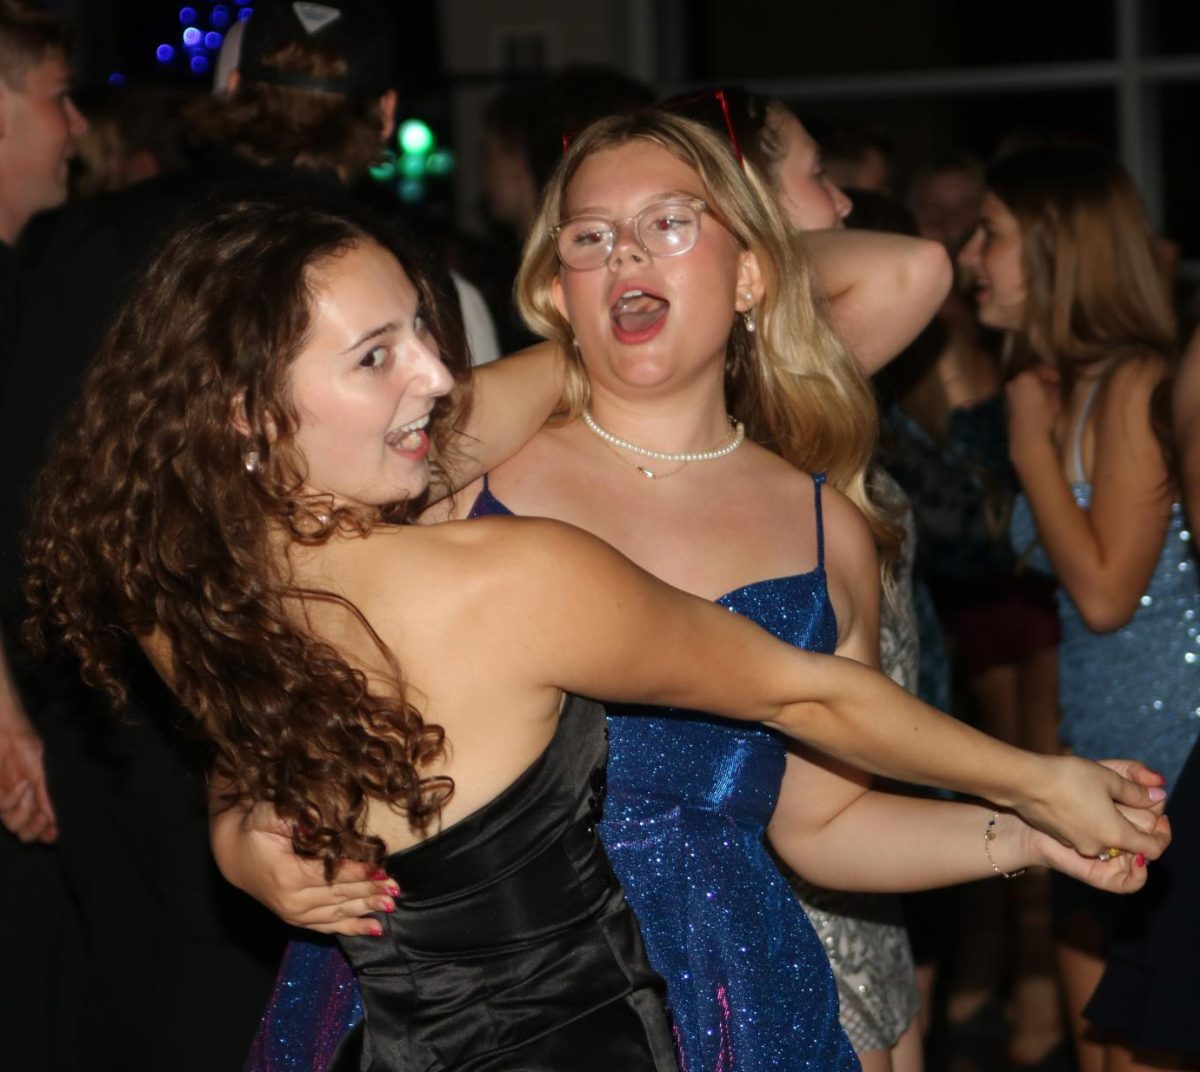 Senior Emily Patten and Sophomore Norah Weber dance like nobodys watching to a Taylor Swift song.